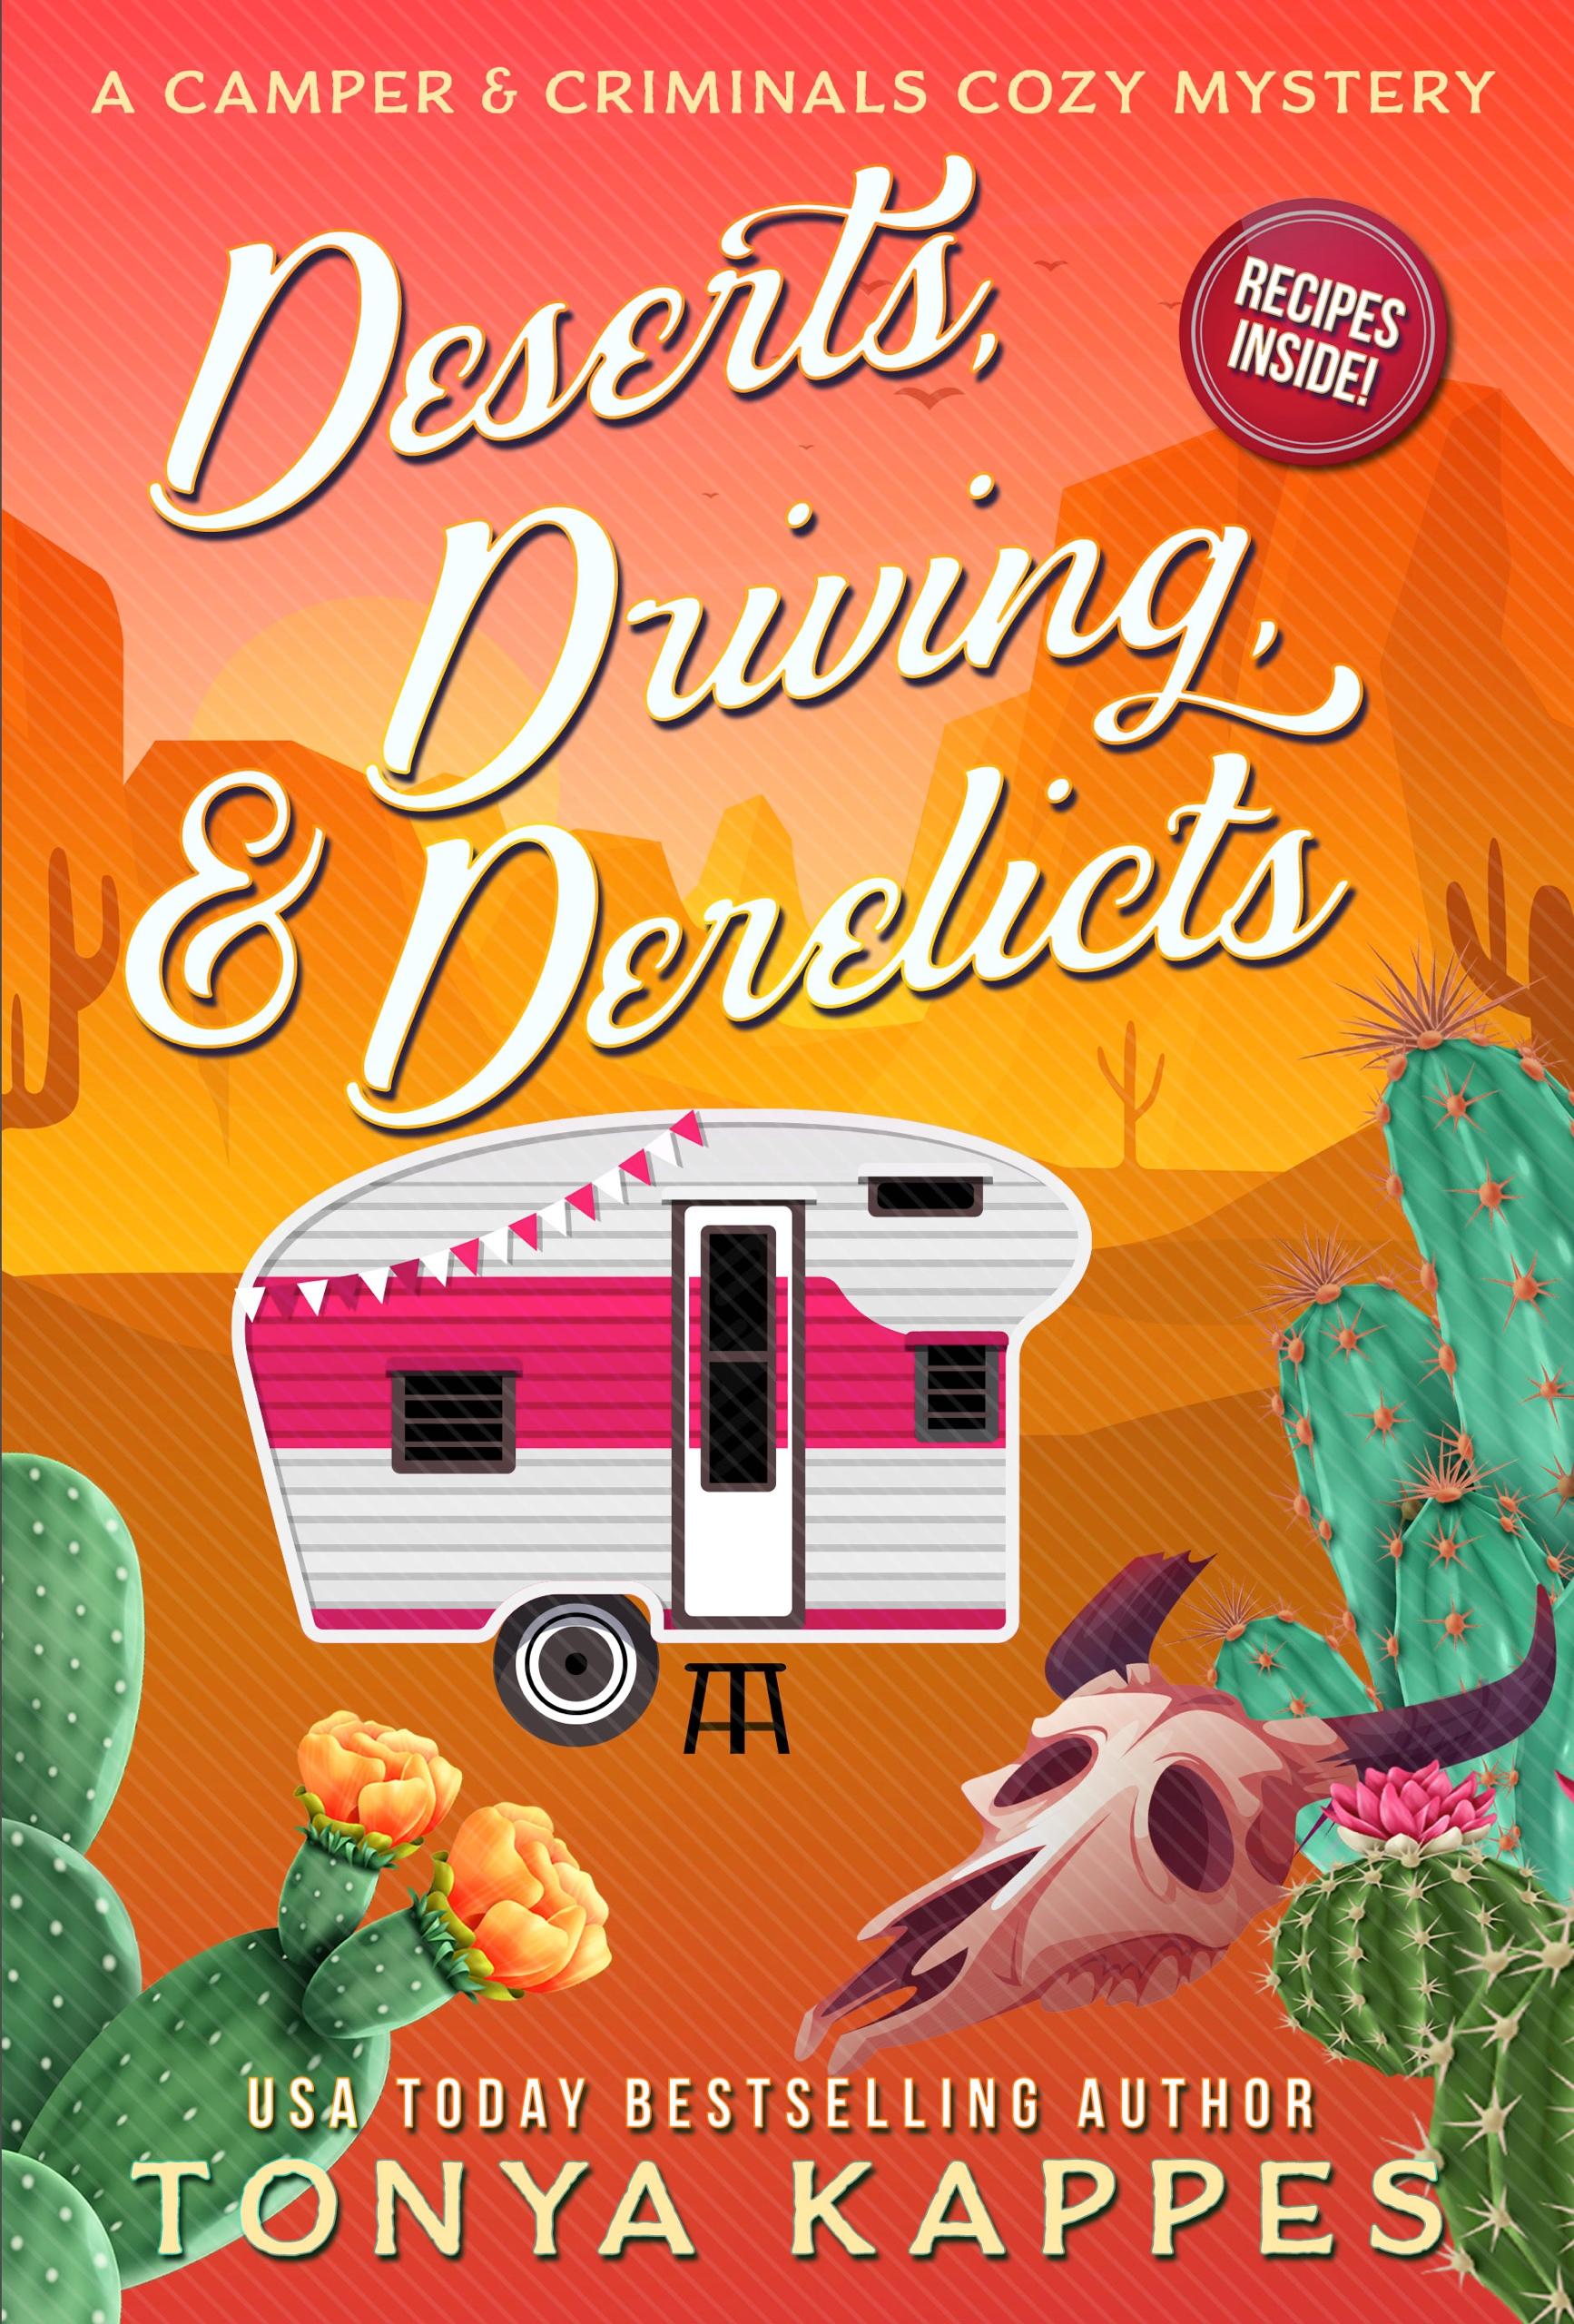 Deserts, Driving, & Derelicts